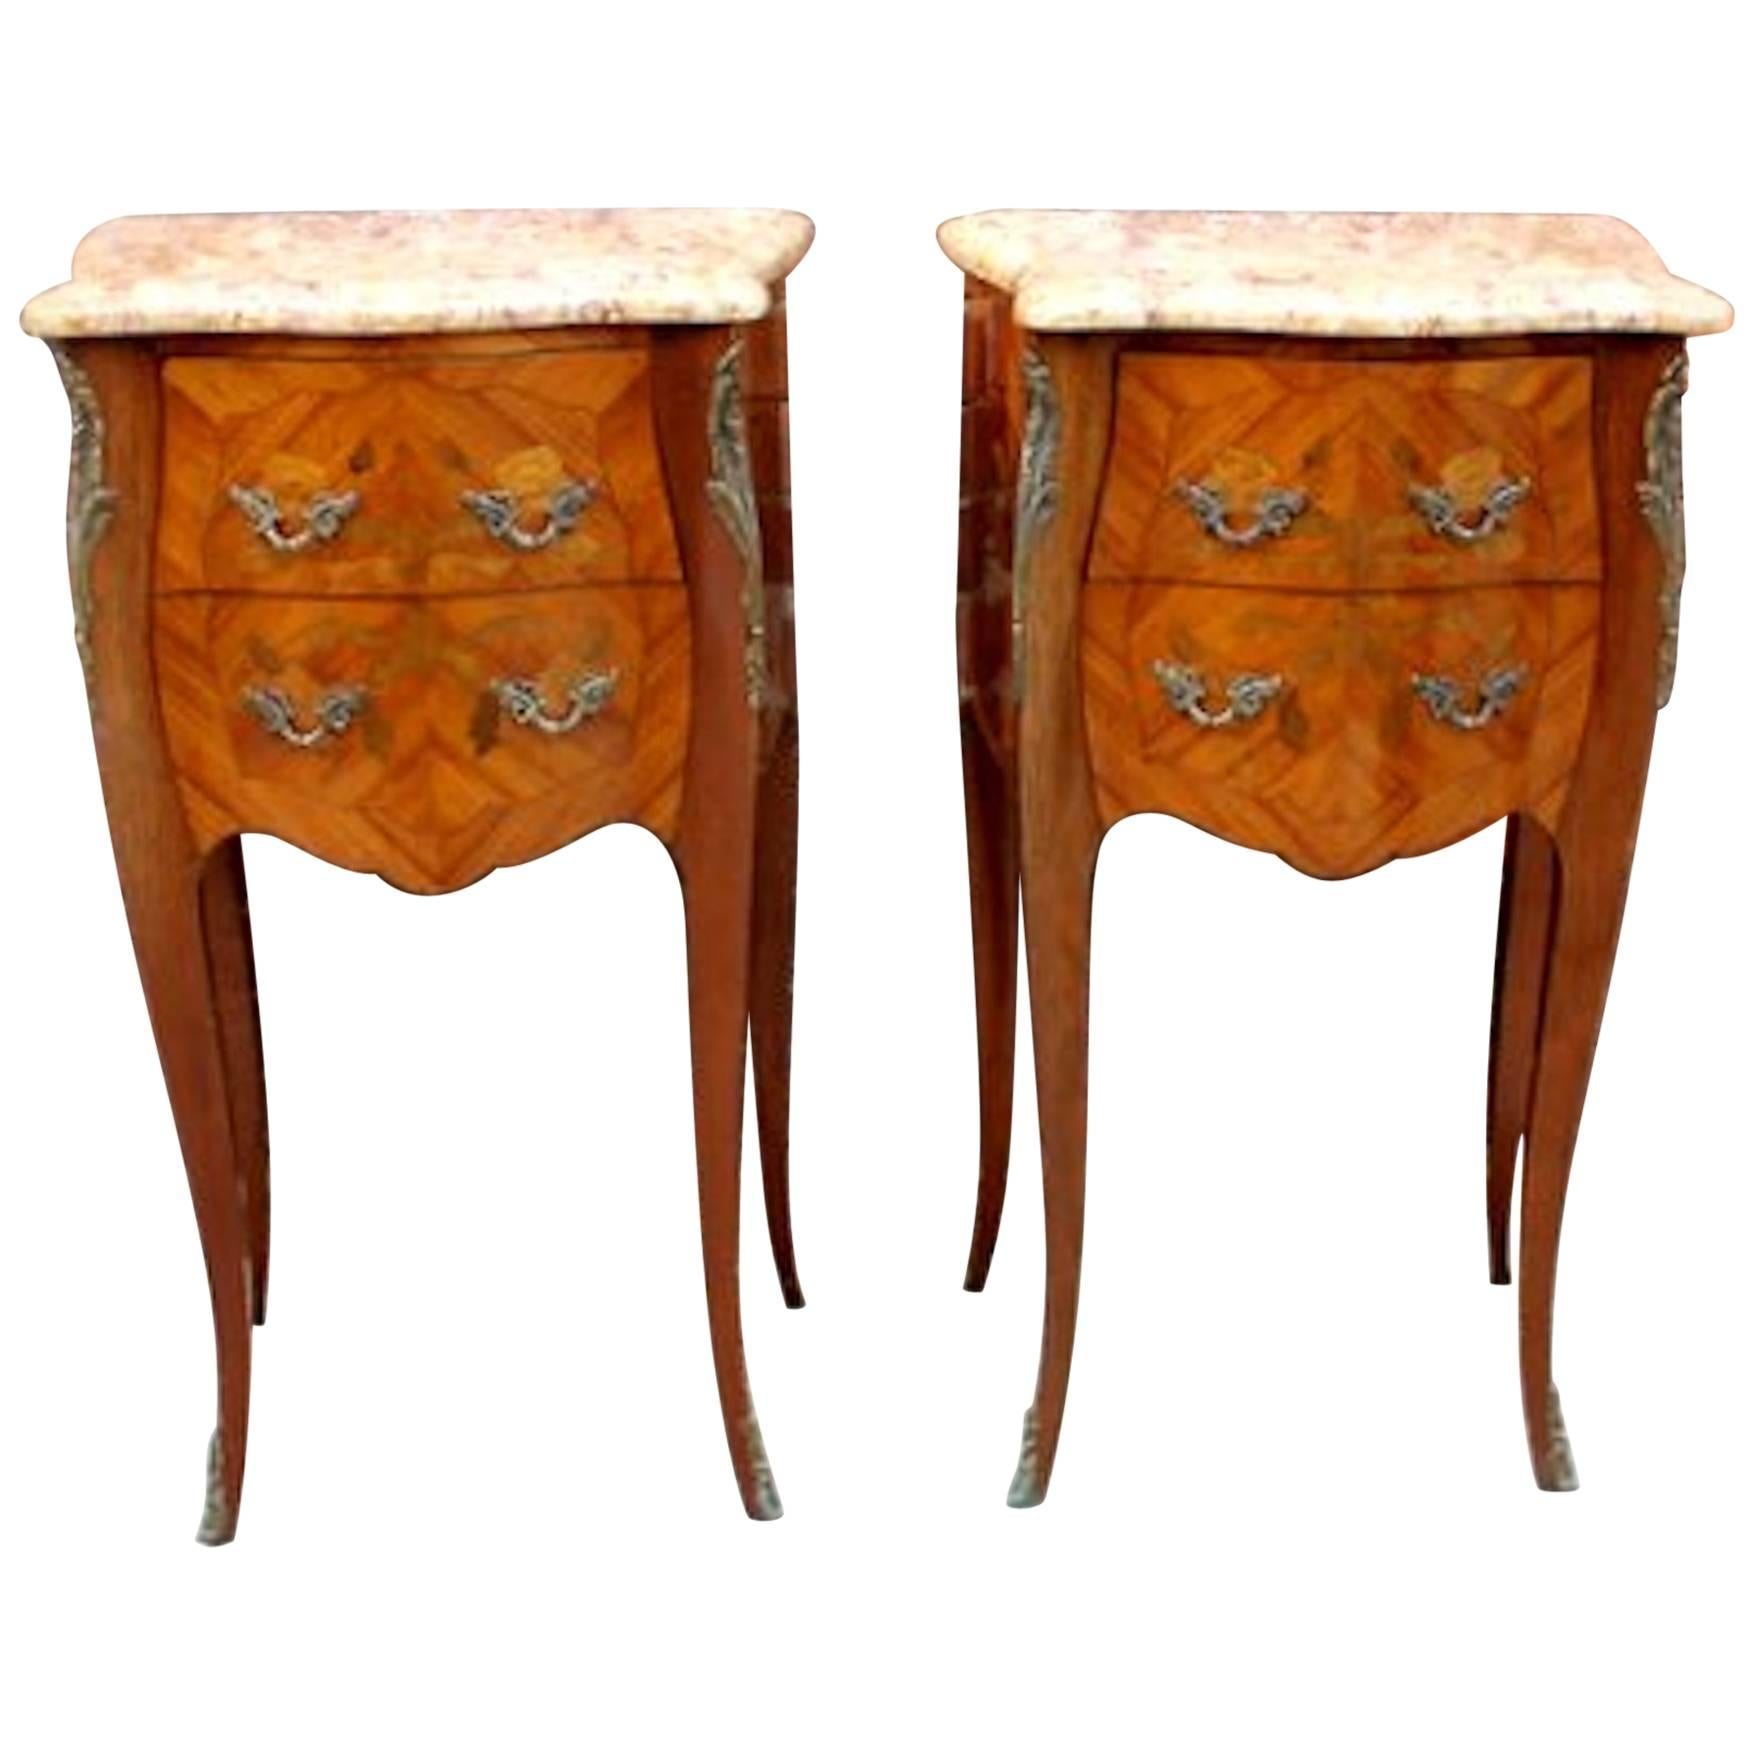 Pair of French Marquetry Inlaid Kingwood Marble Top Chairside Tables